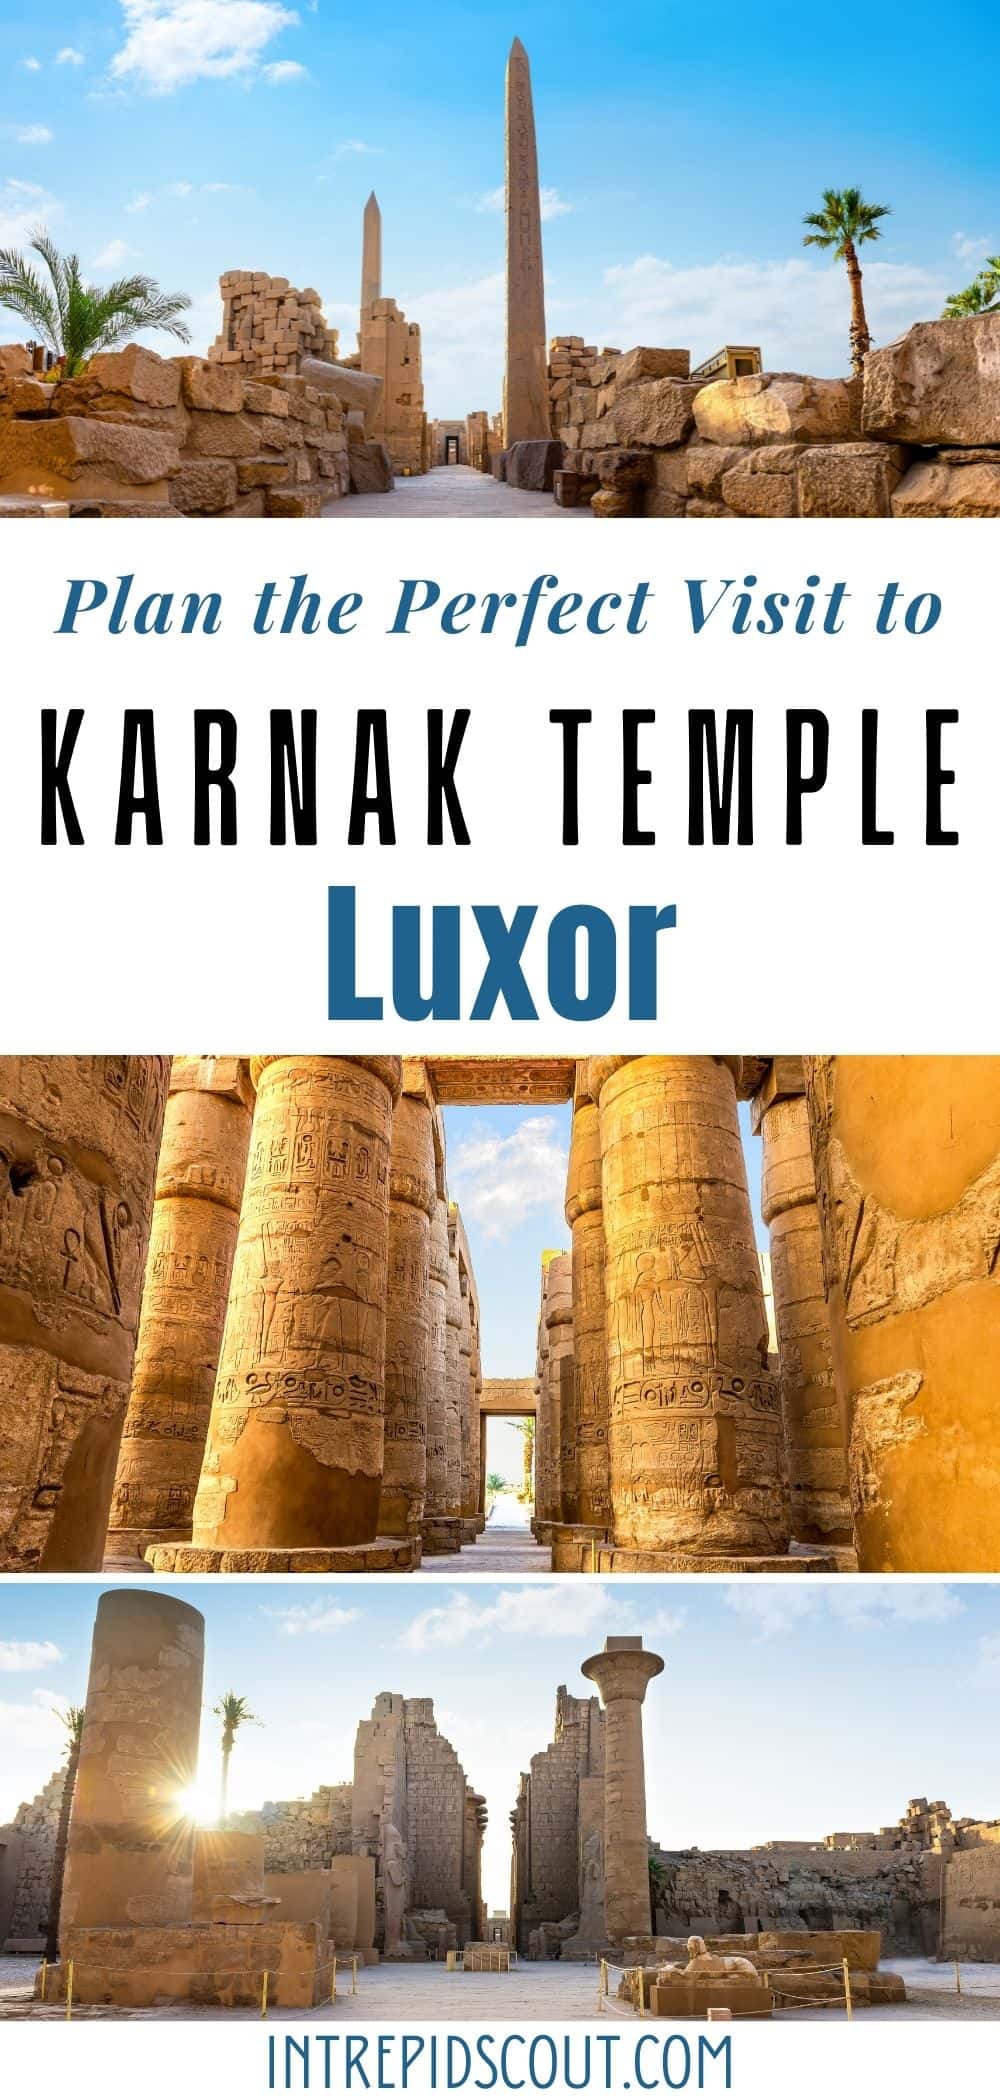 How to Visit Karnak Temple in Luxor